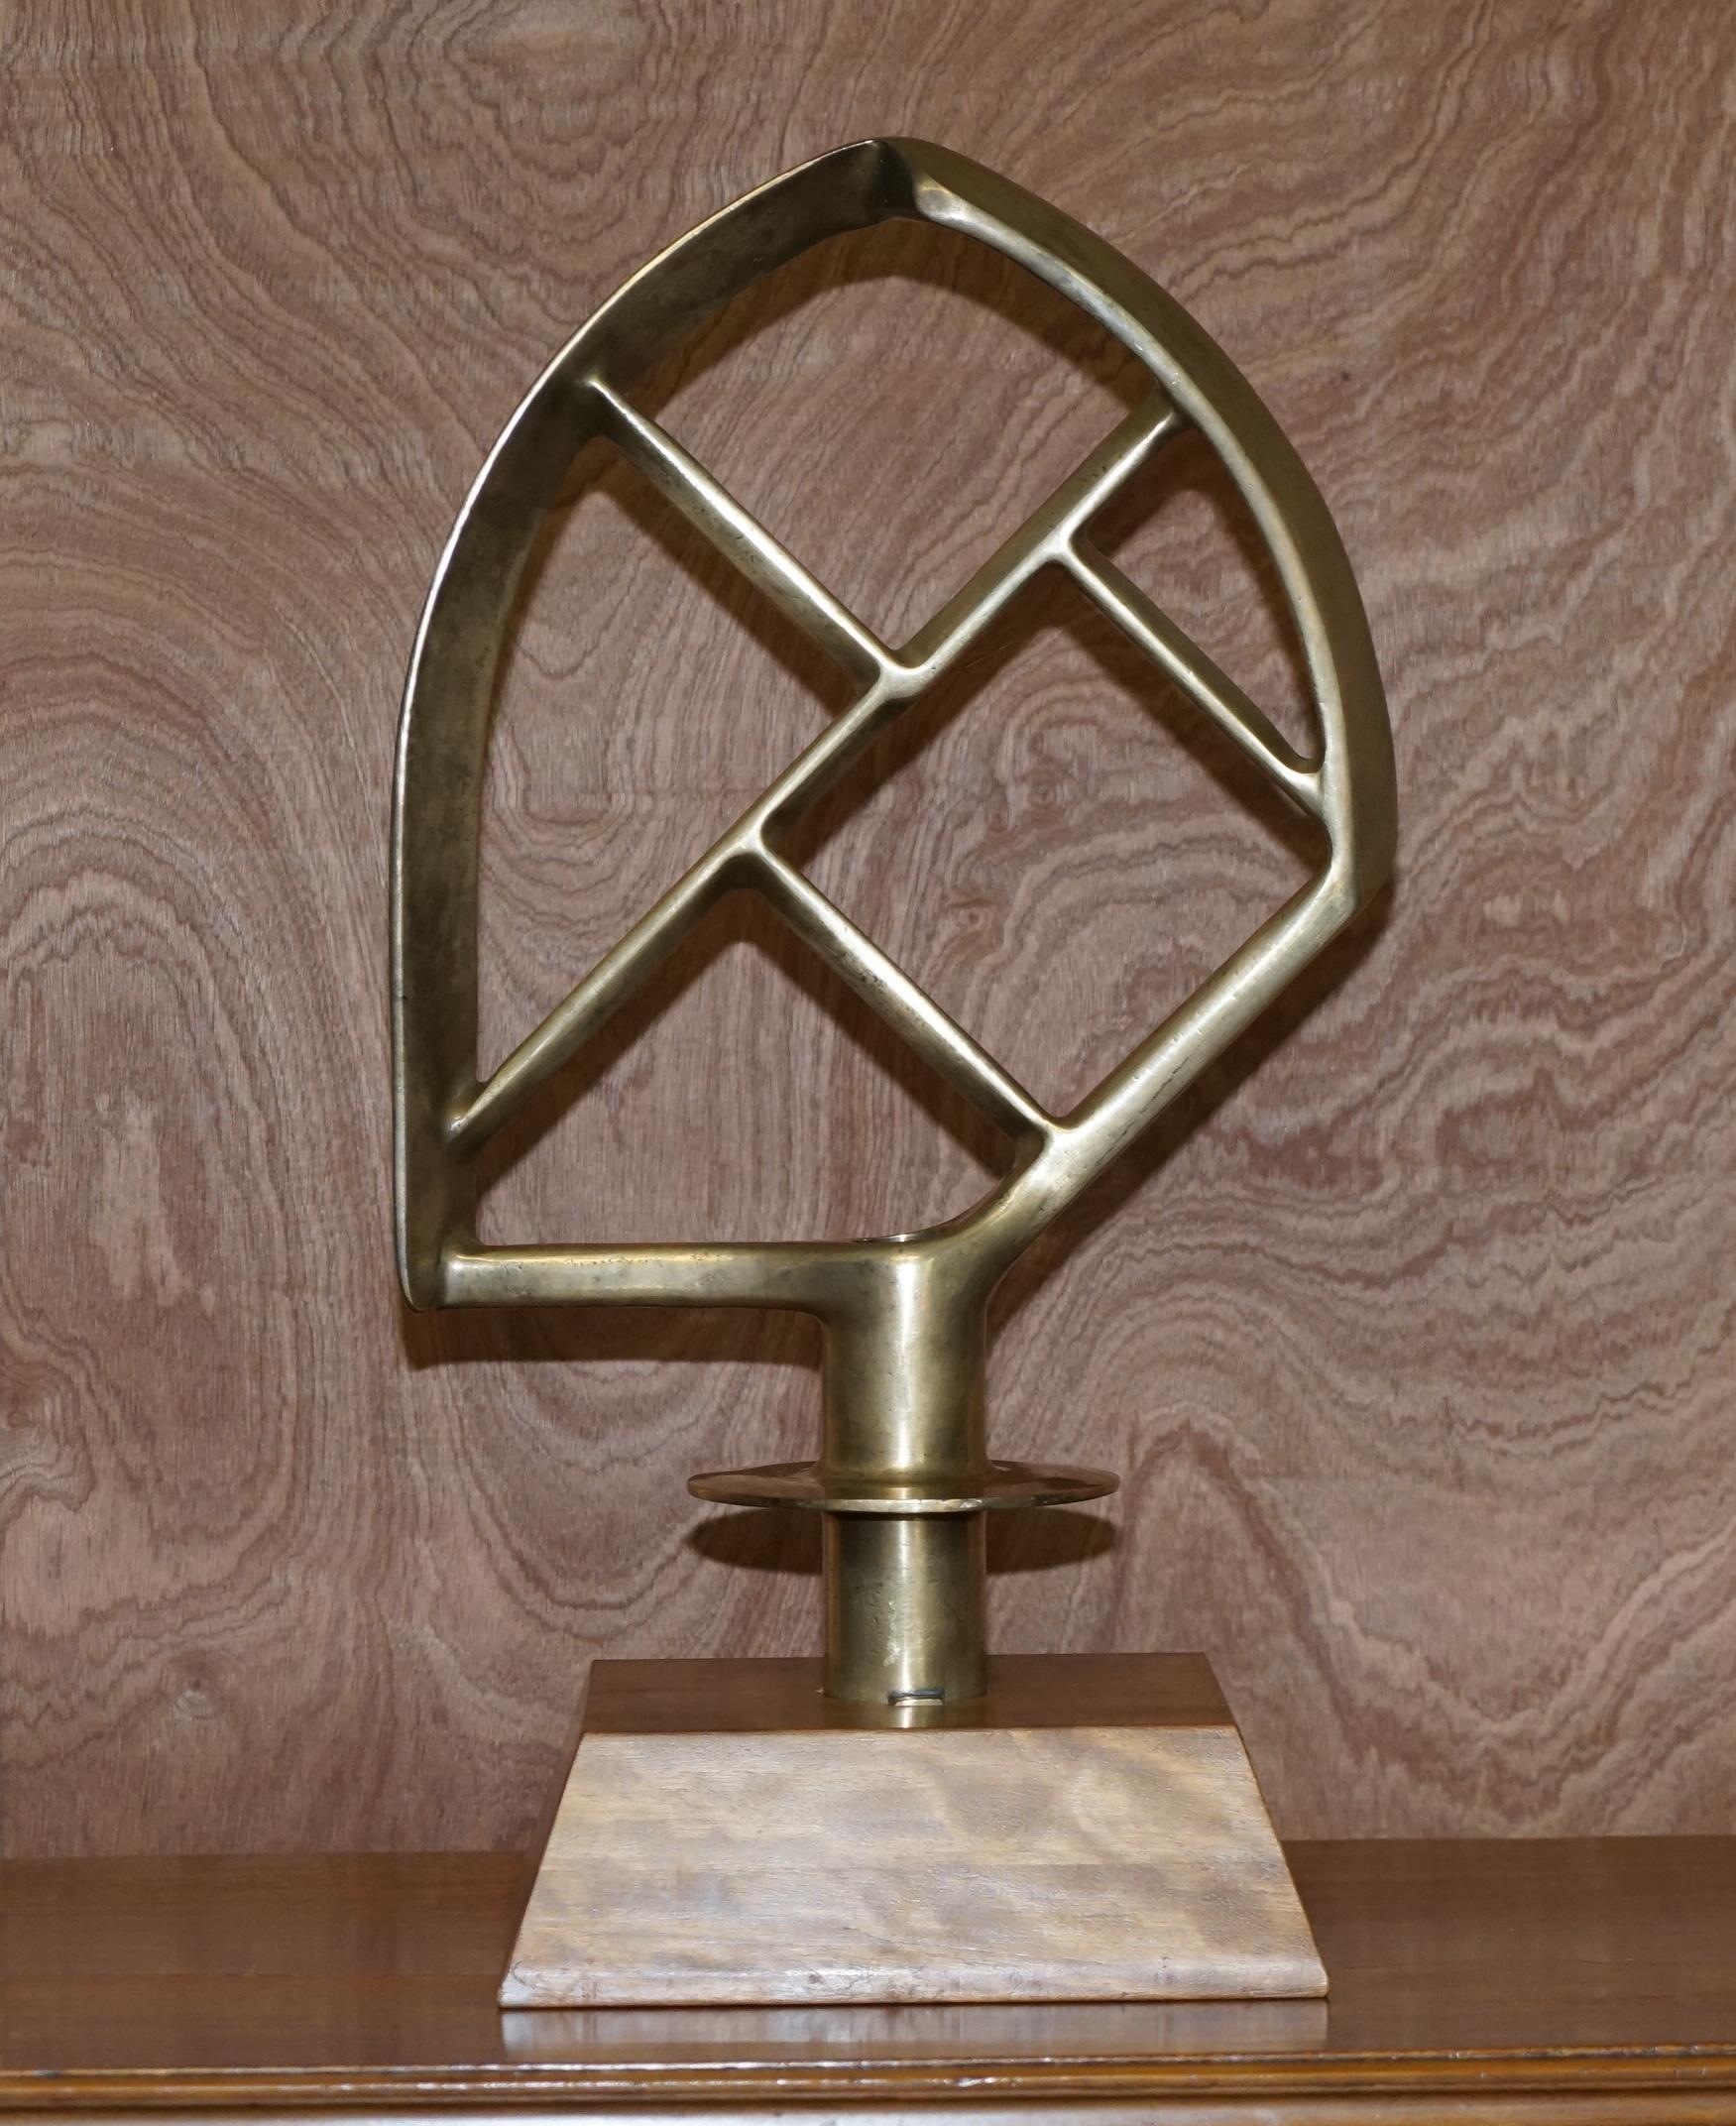 We are delighted to offer for this lovely one of a kind “Lockdown 2020” brass artists sculpture

Please note the delivery fee listed is just a guide, it covers within the M25 only for the UK and local Europe only for international, if you would